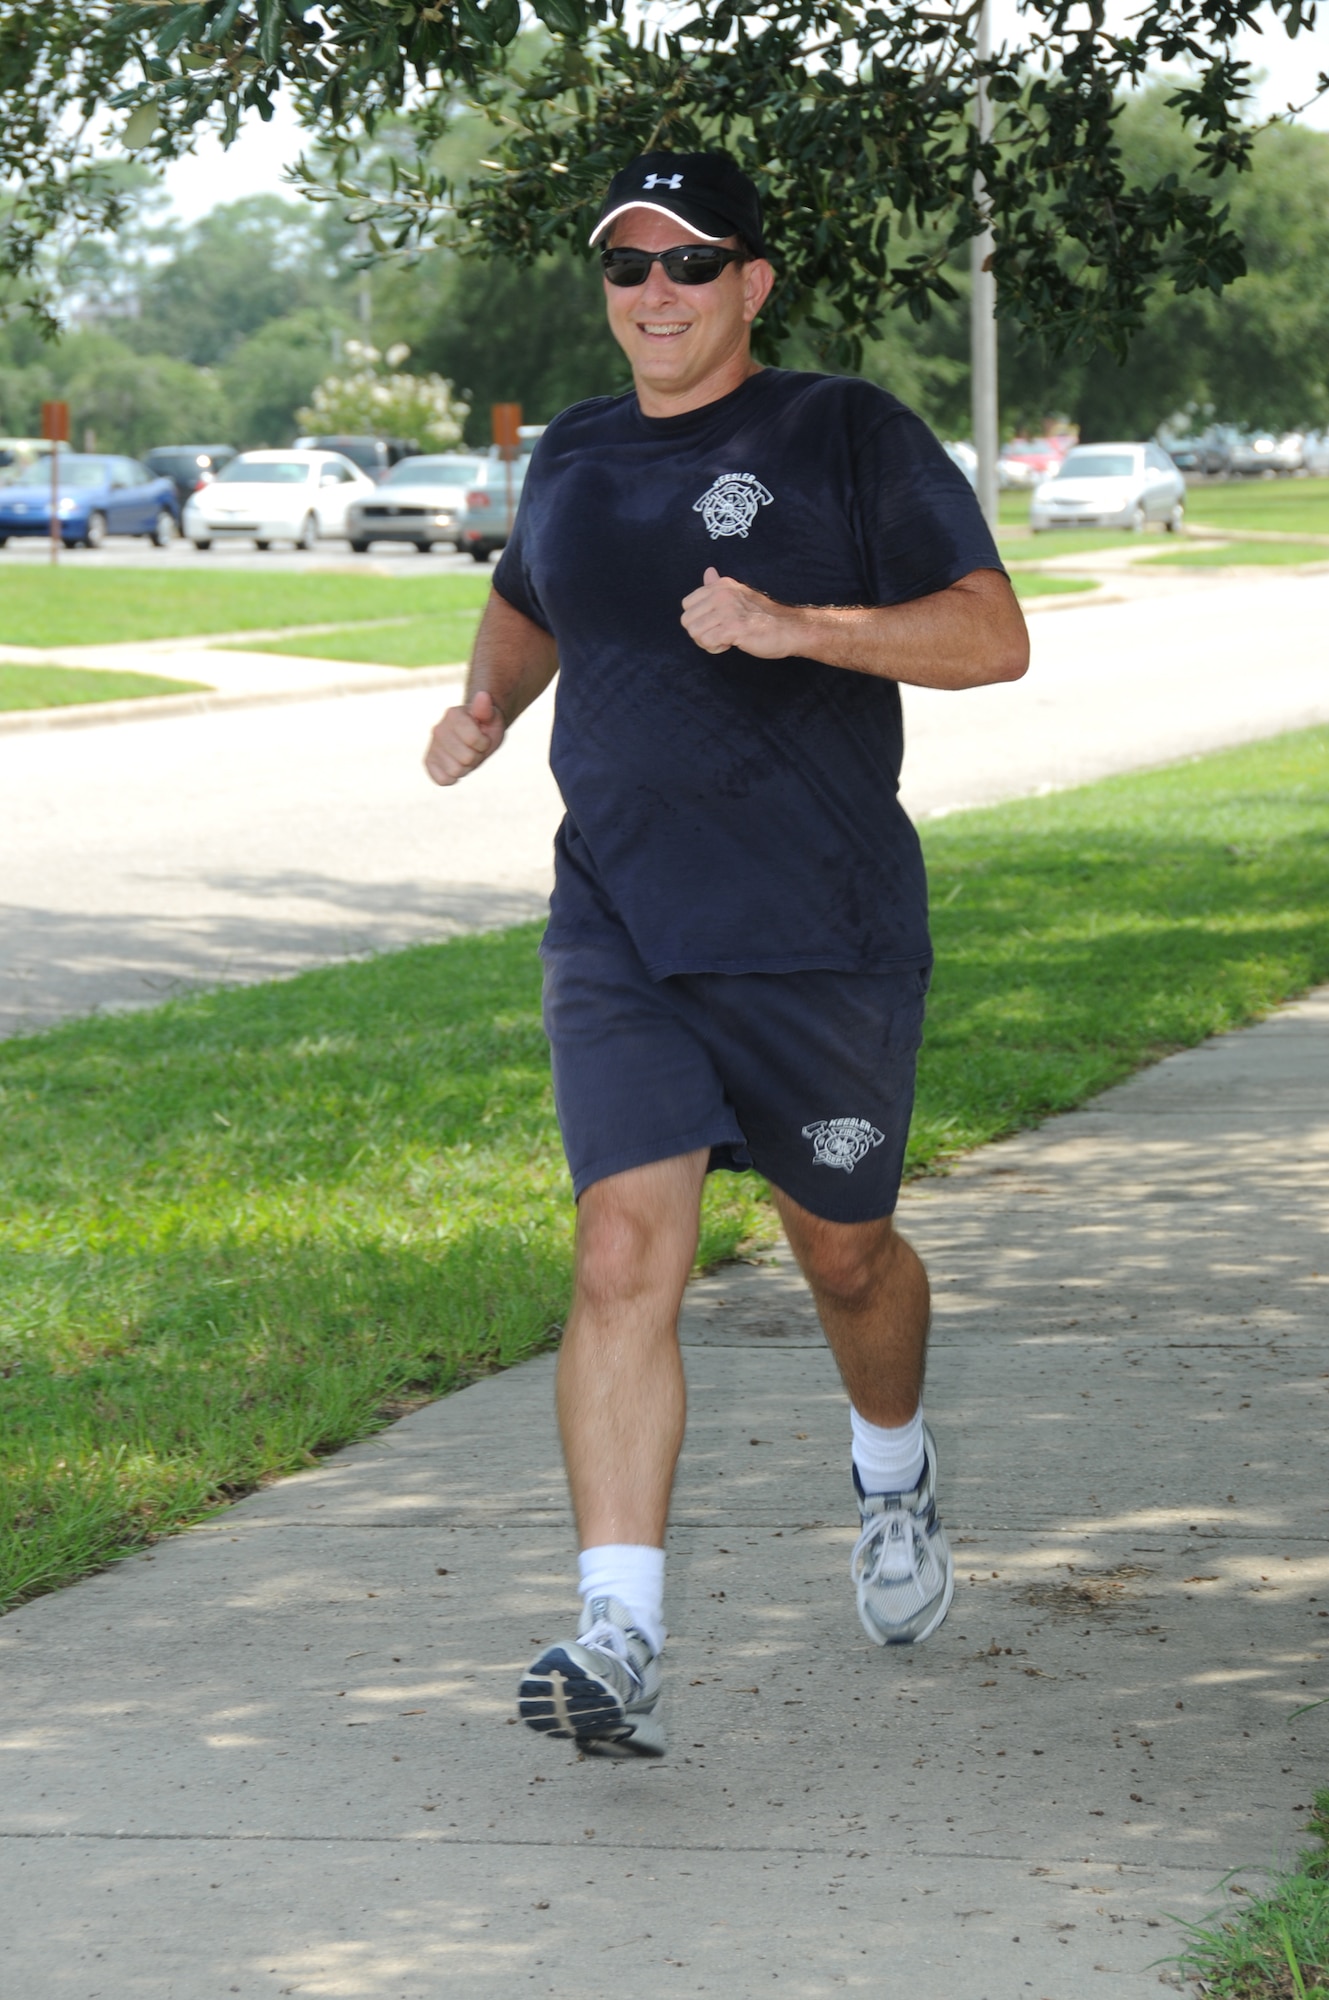 Fire chief James Donnett uses proper techniques as he runs along H Street Monday.  (U.S. Air Force photo by Kemberly Groue)